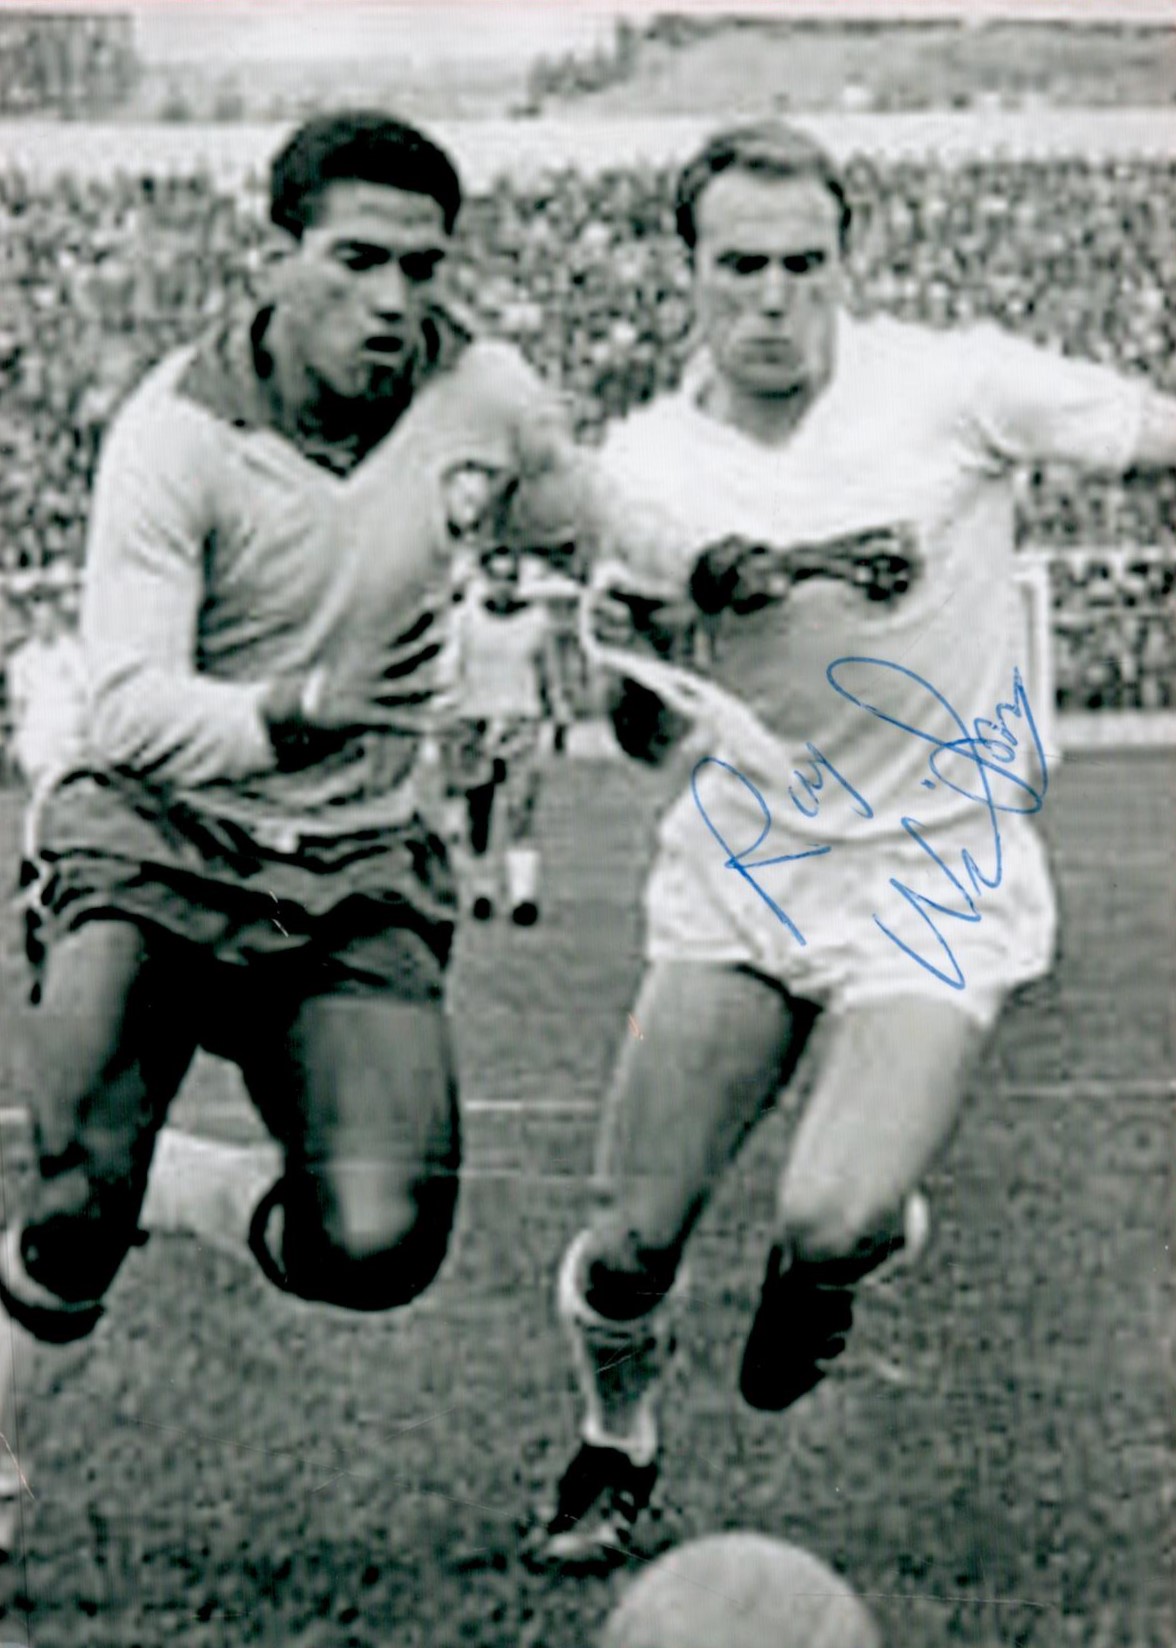 Ray Wilson signed 6x4 black and white photo. Wilson, MBE (17 December 1934 - 15 May 2018) was an